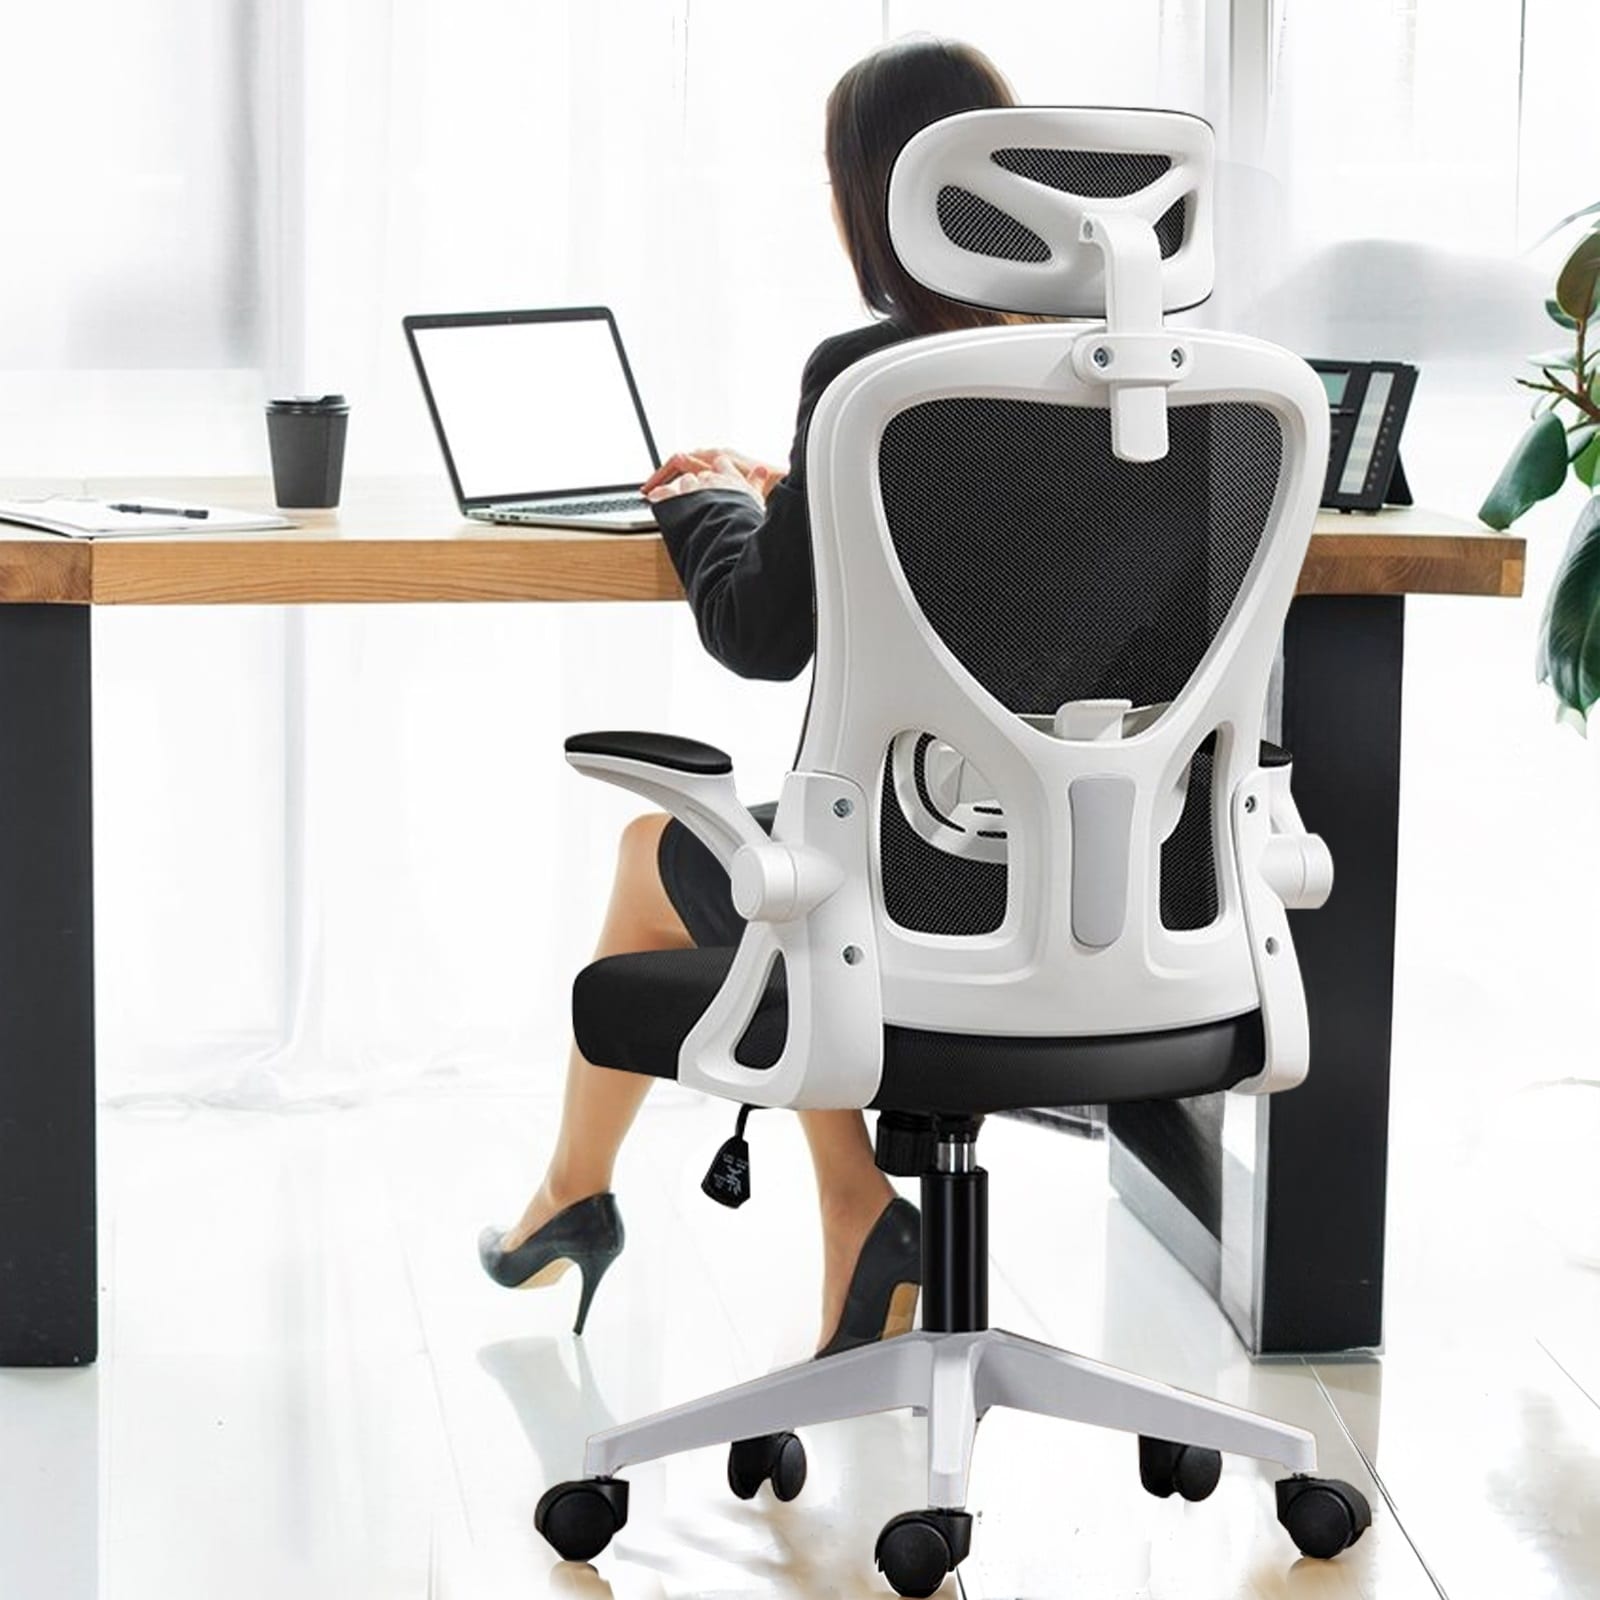 https://ak1.ostkcdn.com/images/products/is/images/direct/294b6a6cb335d06cf065dcb39286fbb1ec0e301b/Office-Chair%2C-Ergonomic-Desk-Chair%2C-High-Back-Faux-Leather-Task-Chairs-for-Home-Office-for-Adult-Working-Study.jpg